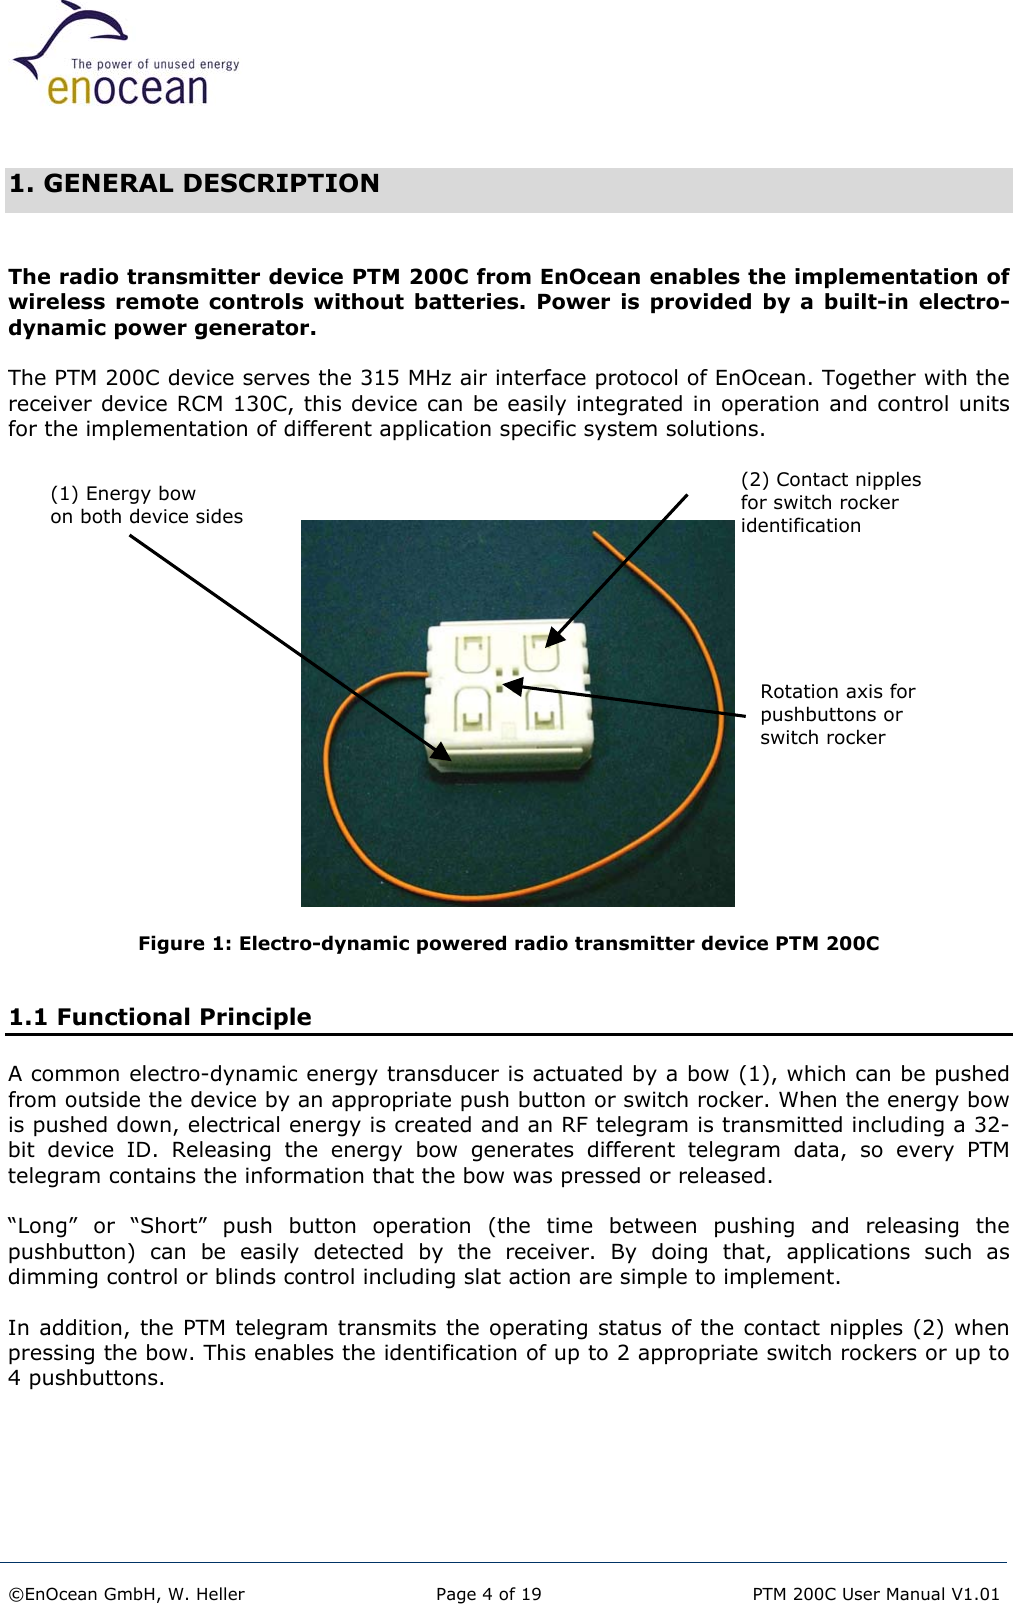   1. GENERAL DESCRIPTION  The radio transmitter device PTM 200C from EnOcean enables the implementation of wireless remote controls without batteries. Power is provided by a built-in electro-dynamic power generator.  The PTM 200C device serves the 315 MHz air interface protocol of EnOcean. Together with the receiver device RCM 130C, this device can be easily integrated in operation and control units for the implementation of different application specific system solutions.                      (2) Contact nipplesfor switch rocker identification (1) Energy bow  on both device sides Rotation axis for  pushbuttons or  switch rocker  Figure 1: Electro-dynamic powered radio transmitter device PTM 200C    1.1 Functional Principle A common electro-dynamic energy transducer is actuated by a bow (1), which can be pushed from outside the device by an appropriate push button or switch rocker. When the energy bow is pushed down, electrical energy is created and an RF telegram is transmitted including a 32-bit device ID. Releasing the energy bow generates different telegram data, so every PTM telegram contains the information that the bow was pressed or released.  “Long” or “Short” push button operation (the time between pushing and releasing the pushbutton) can be easily detected by the receiver. By doing that, applications such as dimming control or blinds control including slat action are simple to implement.  In addition, the PTM telegram transmits the operating status of the contact nipples (2) when pressing the bow. This enables the identification of up to 2 appropriate switch rockers or up to 4 pushbuttons.    ©EnOcean GmbH, W. Heller  Page 4 of 19   PTM 200C User Manual V1.01  